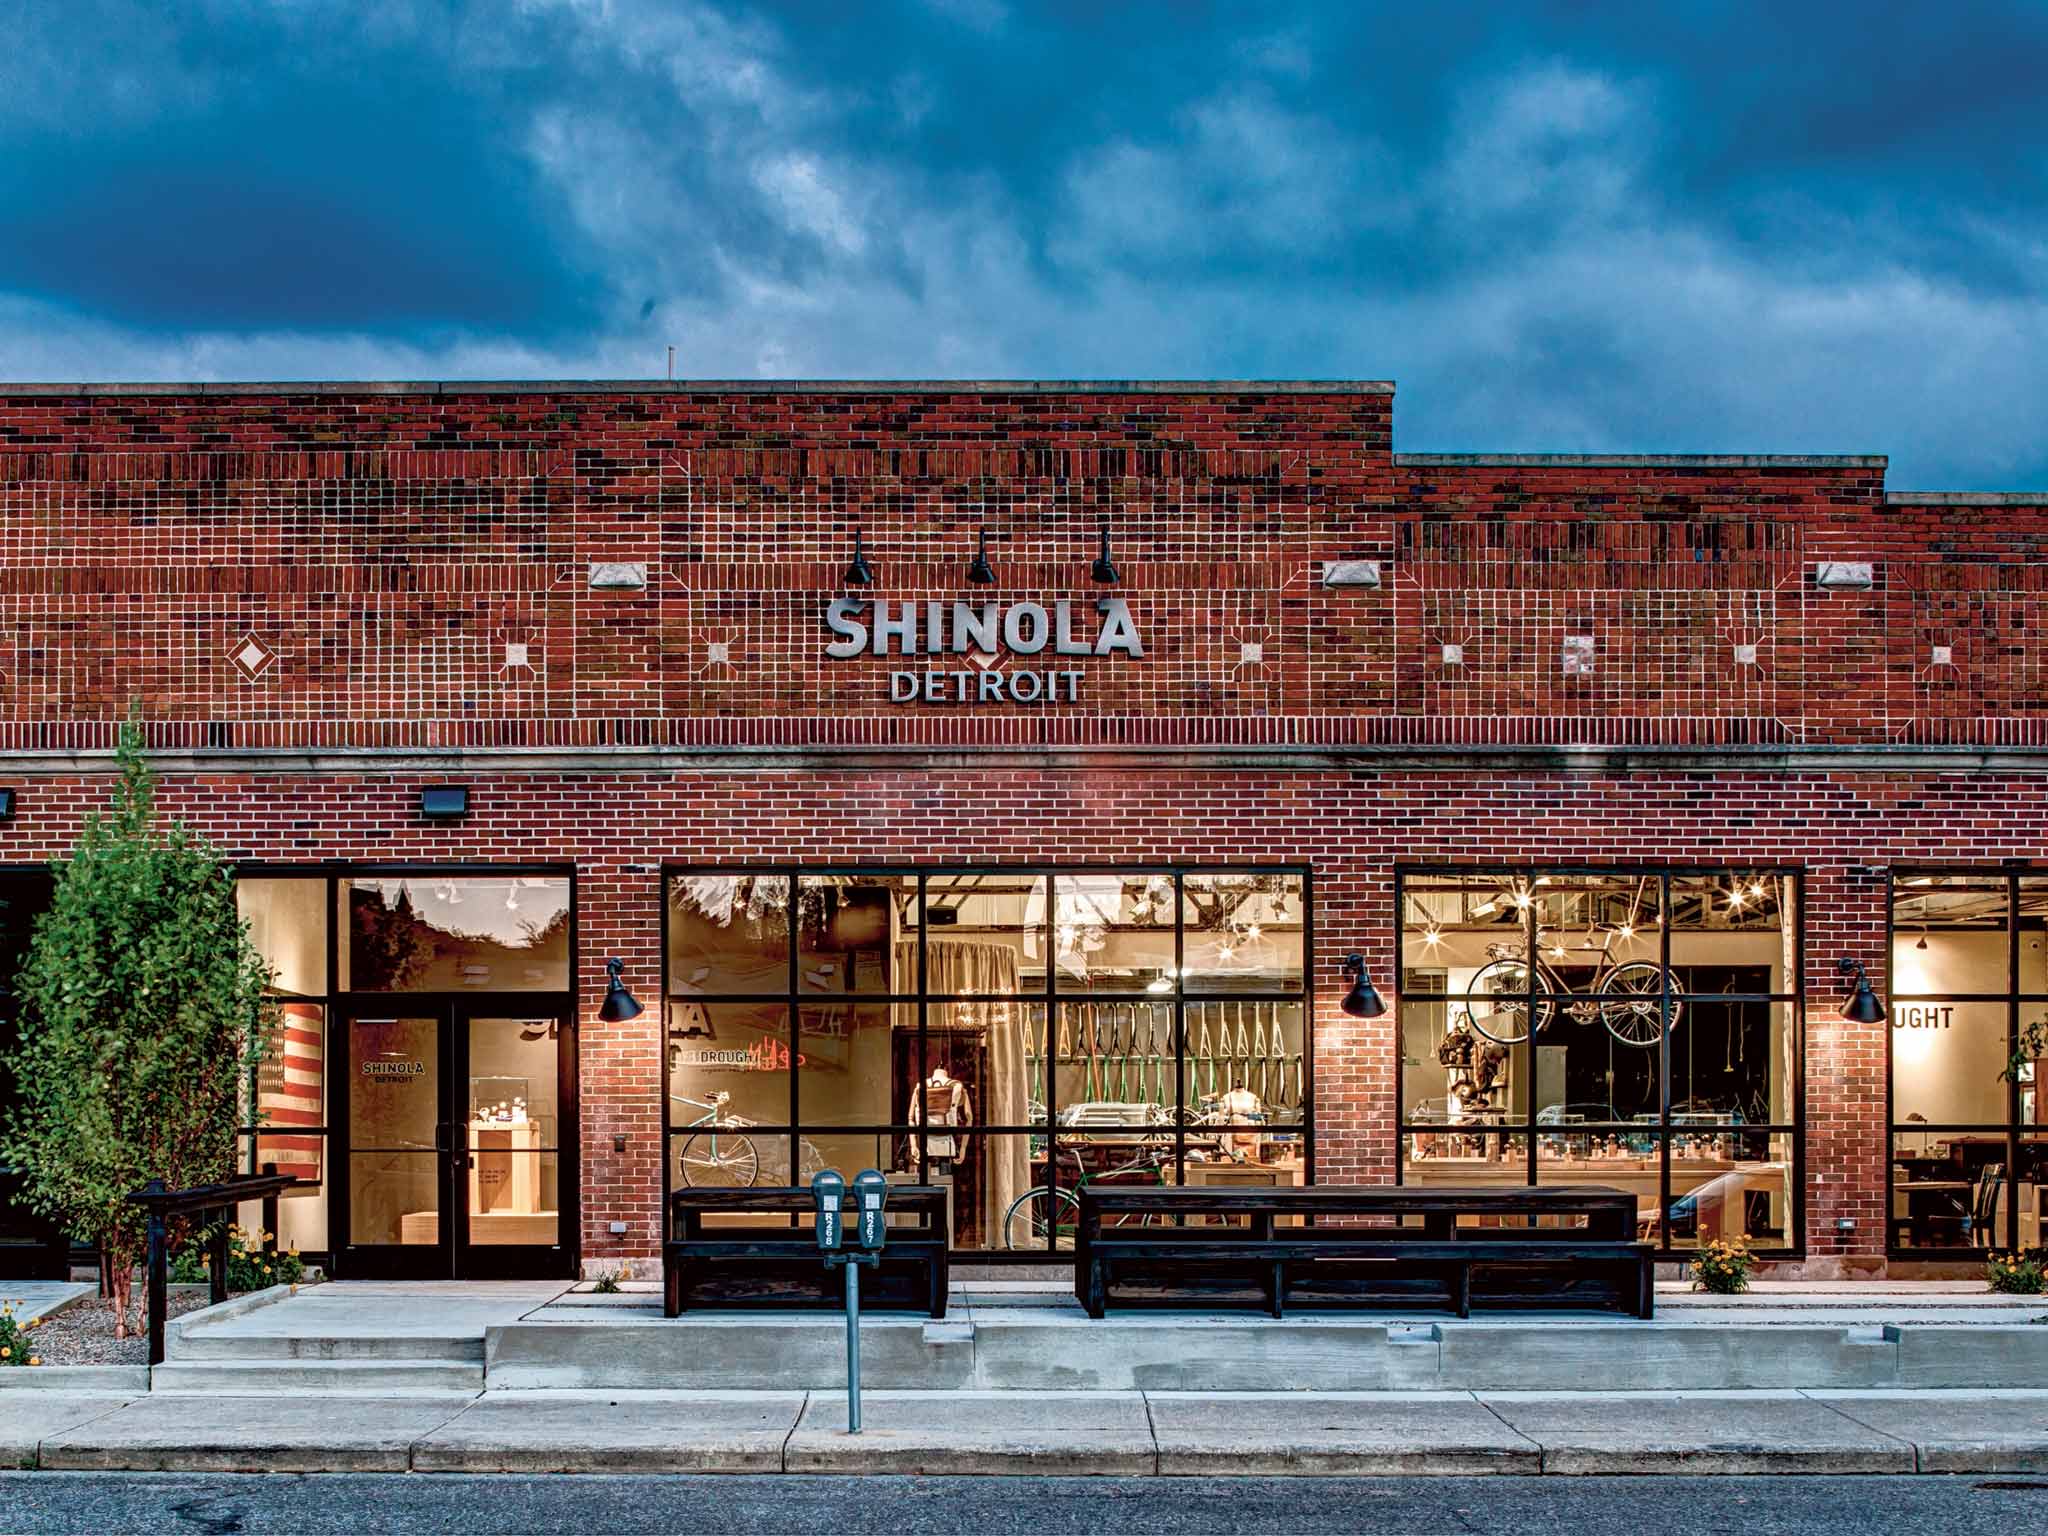 The Shinola store in an area of midtown Detroit once associated with drugs and prostitution. 'We want people to feel comfortable,' says Daniel Caudill, creative director of the brand. 'If you don’t want to buy a watch, then don't. But come in, hang out, and have coffee'